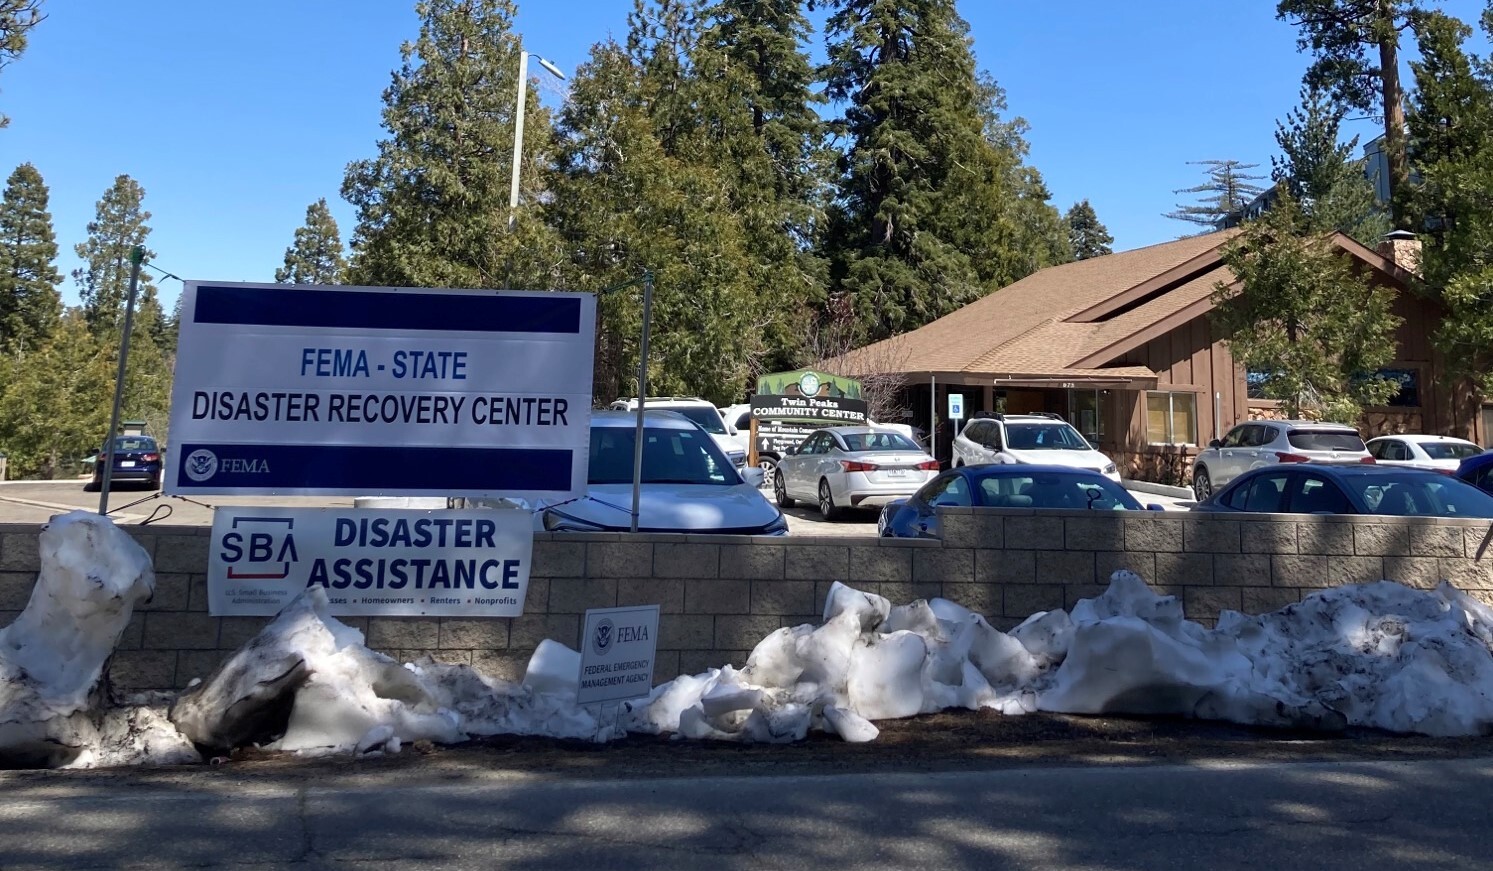 The FEMA Disaster Recovery Center in Twin Peaks.